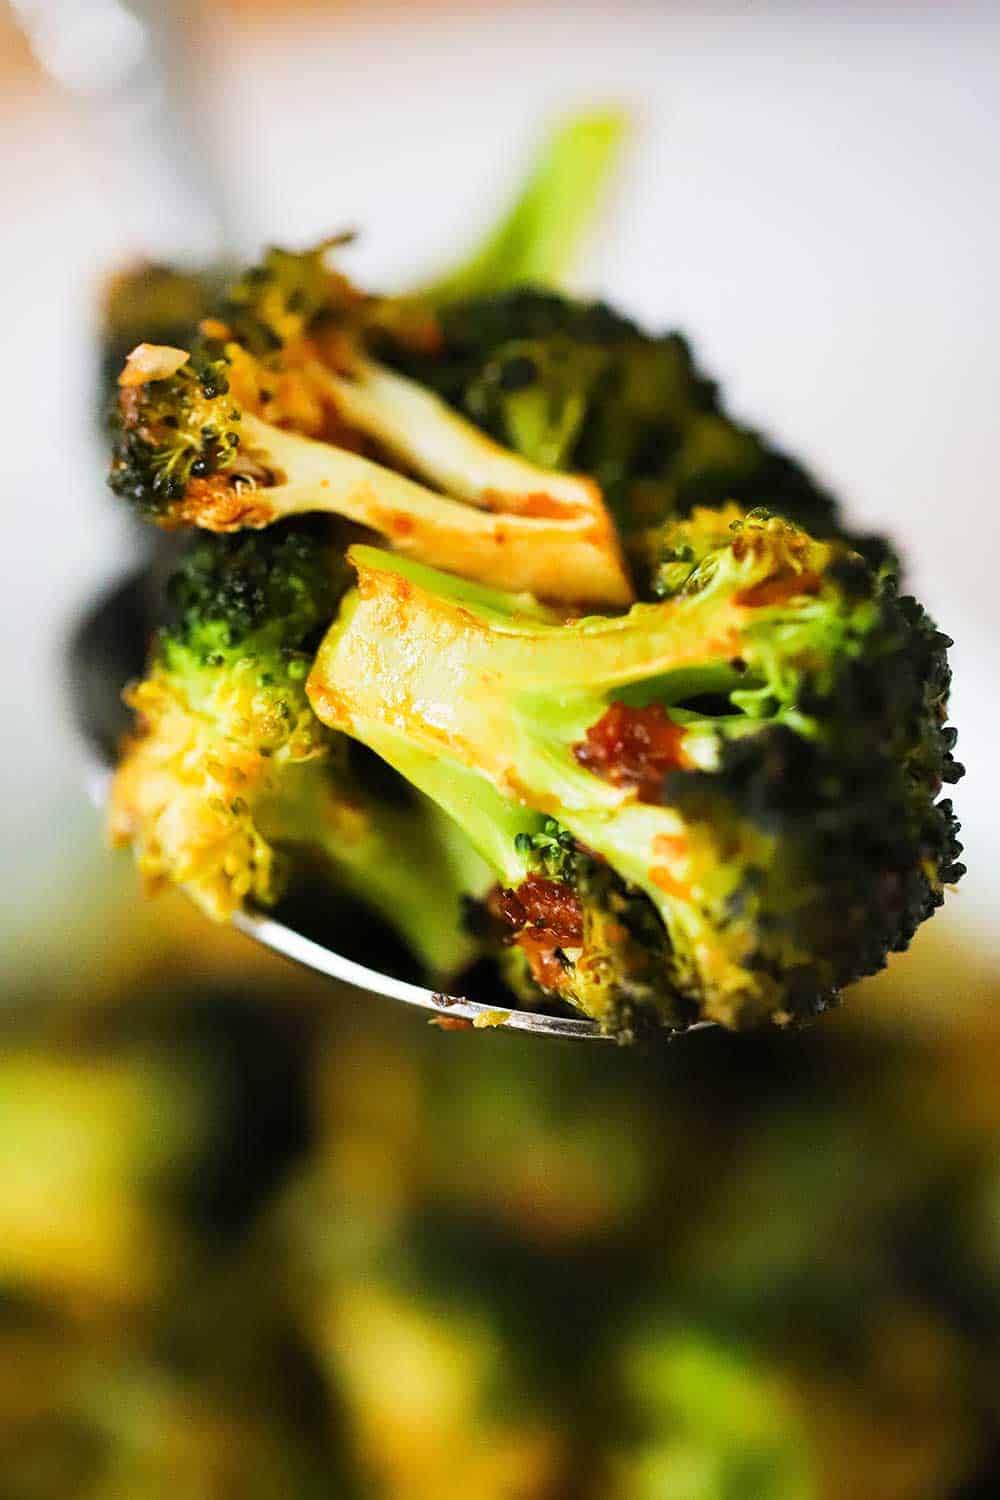 A large silver spoon holding up a helping of roasted broccoli with red pepper flakes on it. 